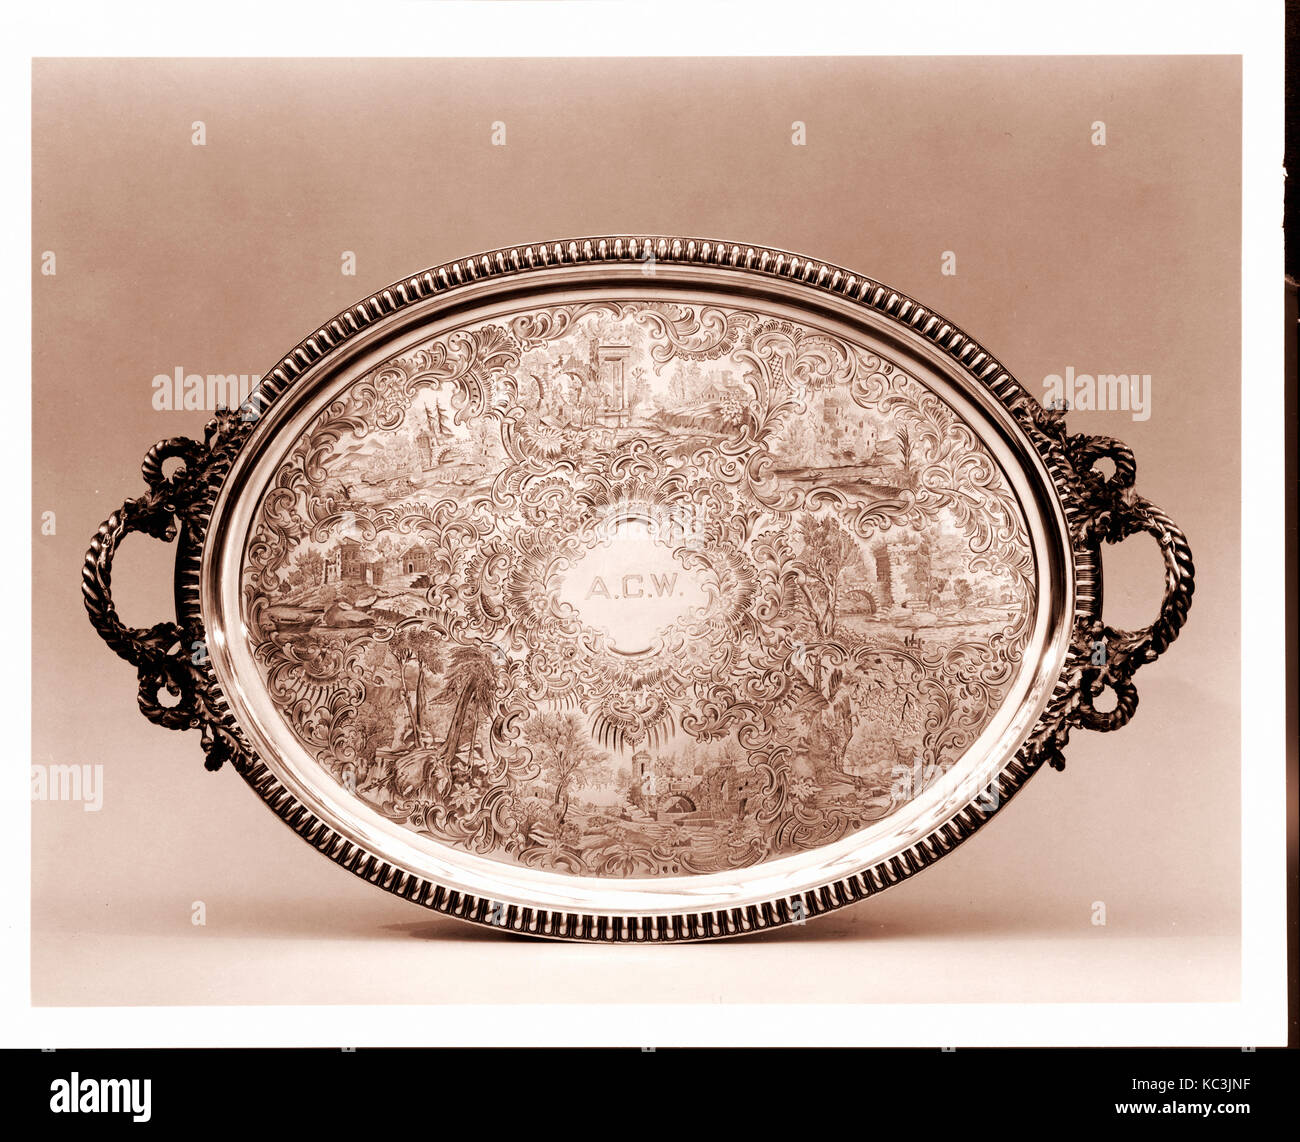 Tray, 1800–1900, Made in New York, New York, United States, American, Silver, 2 3/8 x 31 x 19 7/8 in. (6 x 78.7 x 50.5 cm Stock Photo